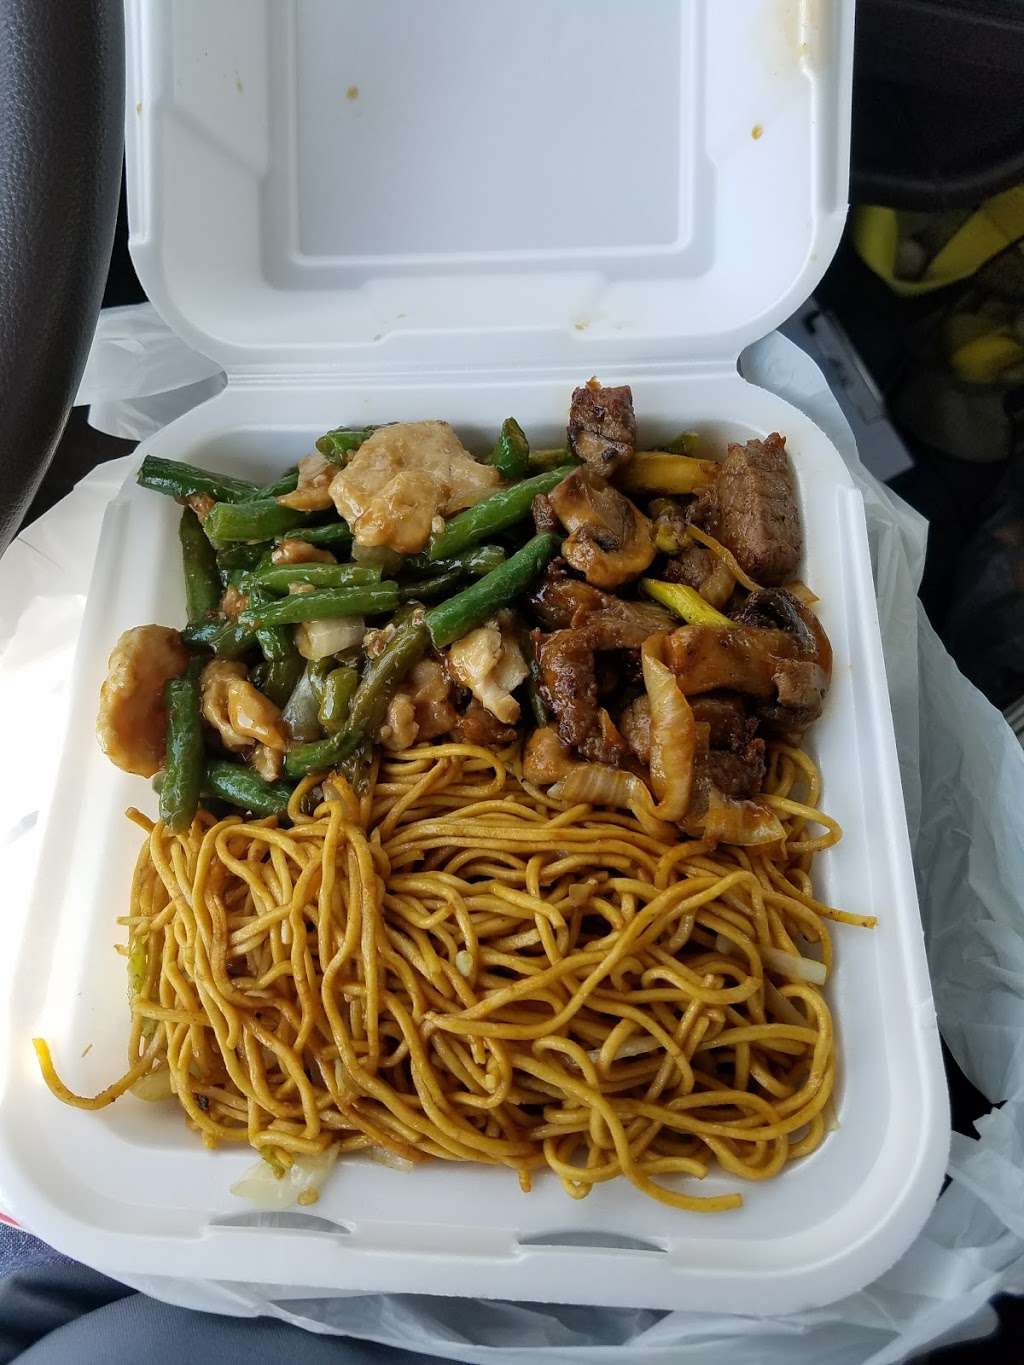 Panda Express | 8255 E 96th St, Indianapolis, IN 46256 | Phone: (317) 845-9209